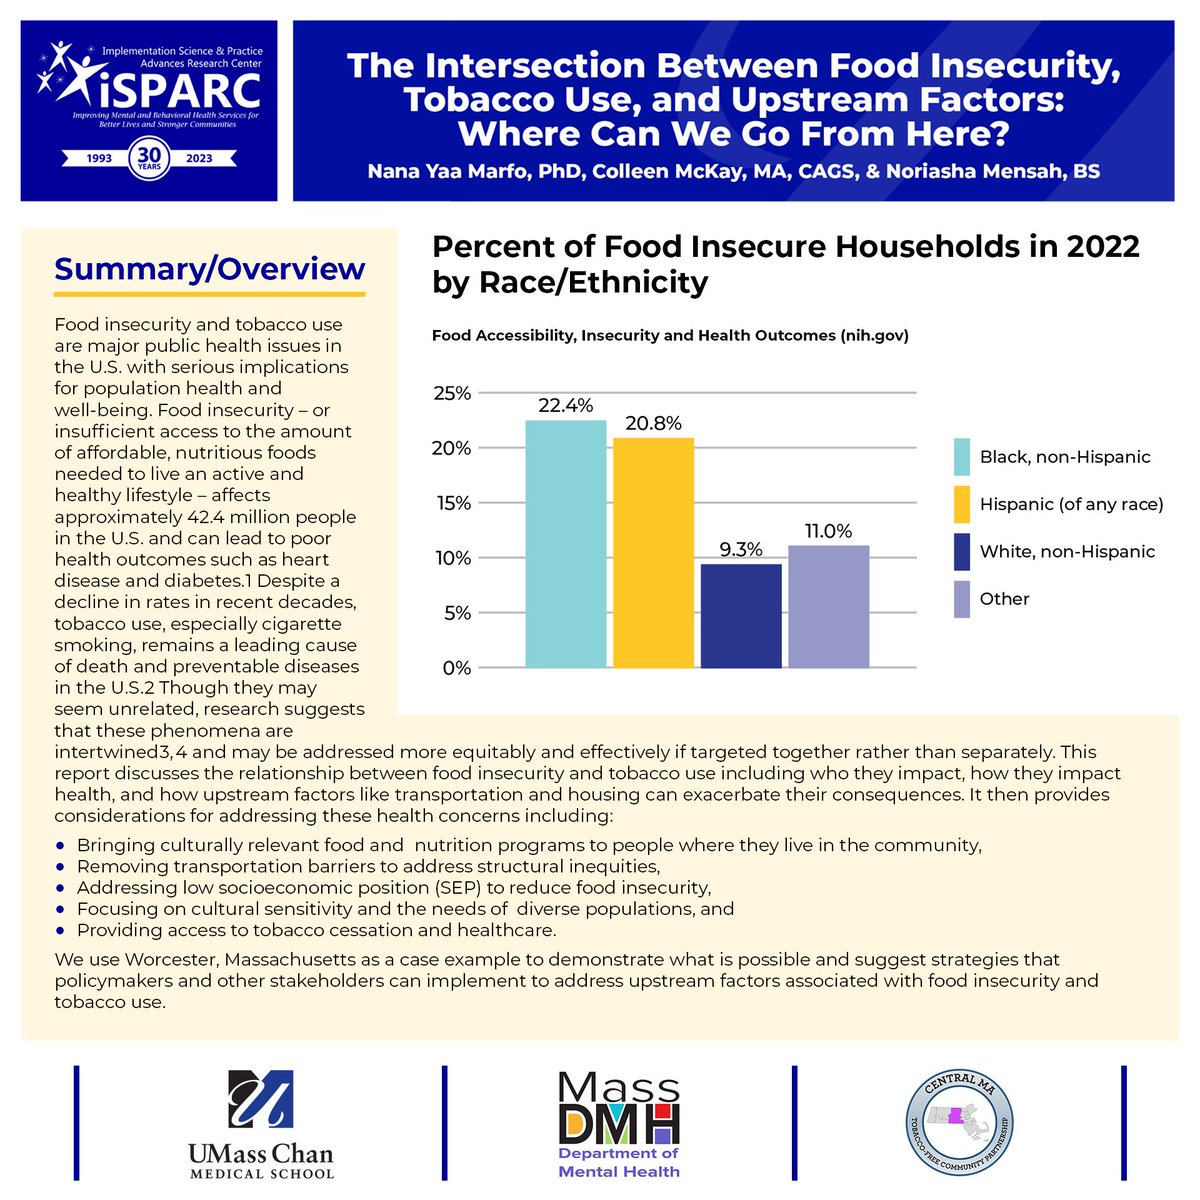 🆕 Research: The Intersection Between #FoodInsecurity, #TobaccoUse, and Upstream Factors: Where Can We Go From Here? buff.ly/3vkLrzg @UMassChan @UMassPsychiatry @MassDMH @MassDPH @WCACinfo @TweetWorcester @CDCTobaccoFree @DMHCommissioner @DTA_Listens @TransitionsACR